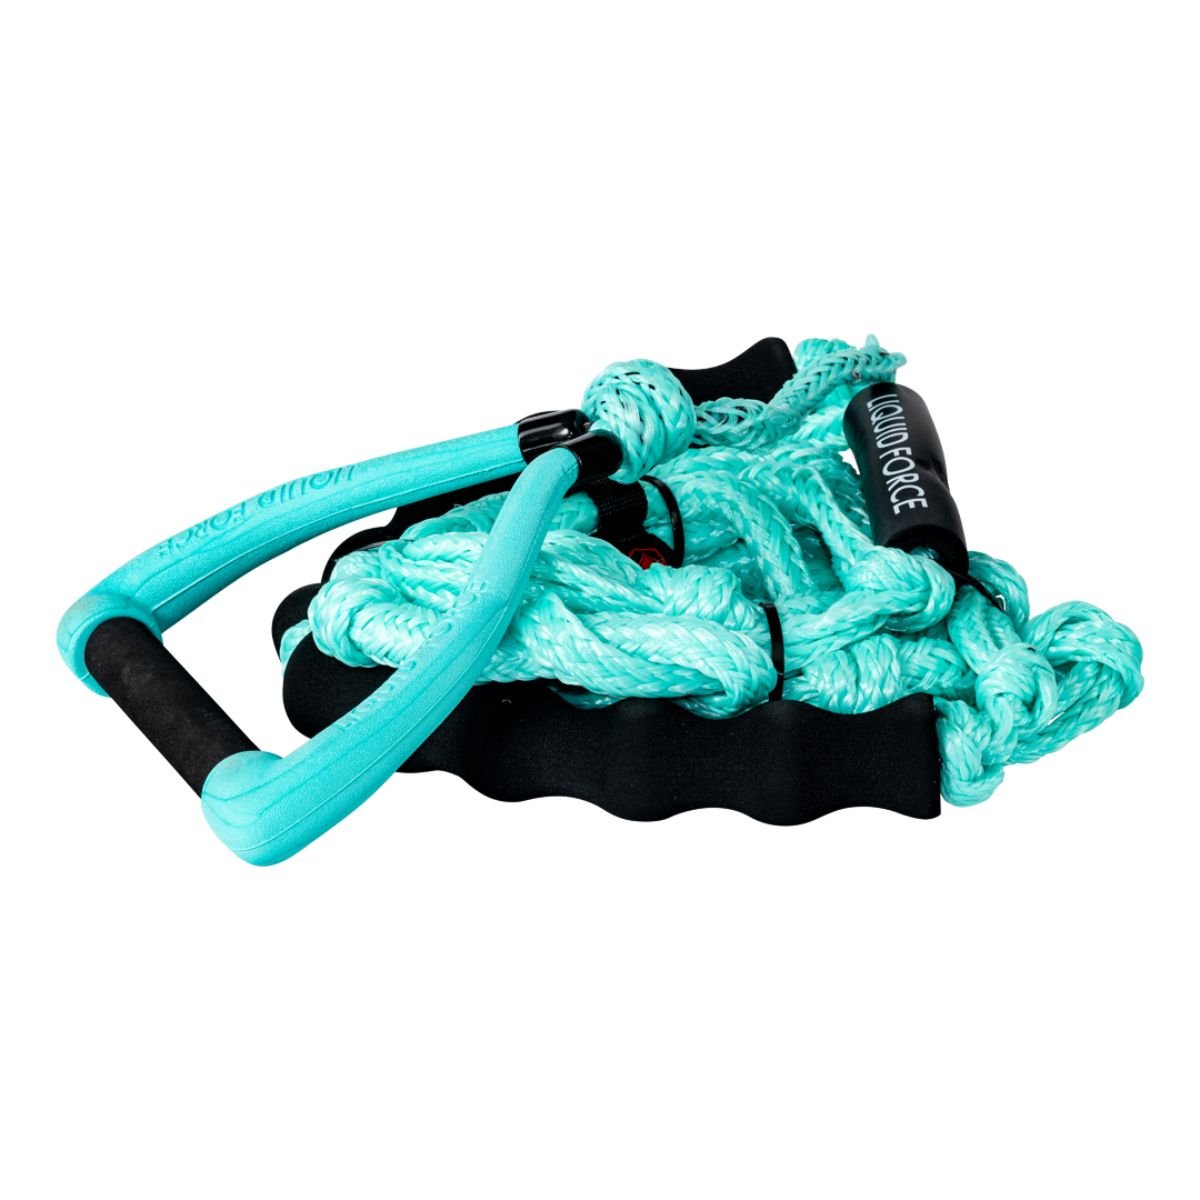 Liquid Force DLX Molded Surf Rope in Blue/Black - BoardCo